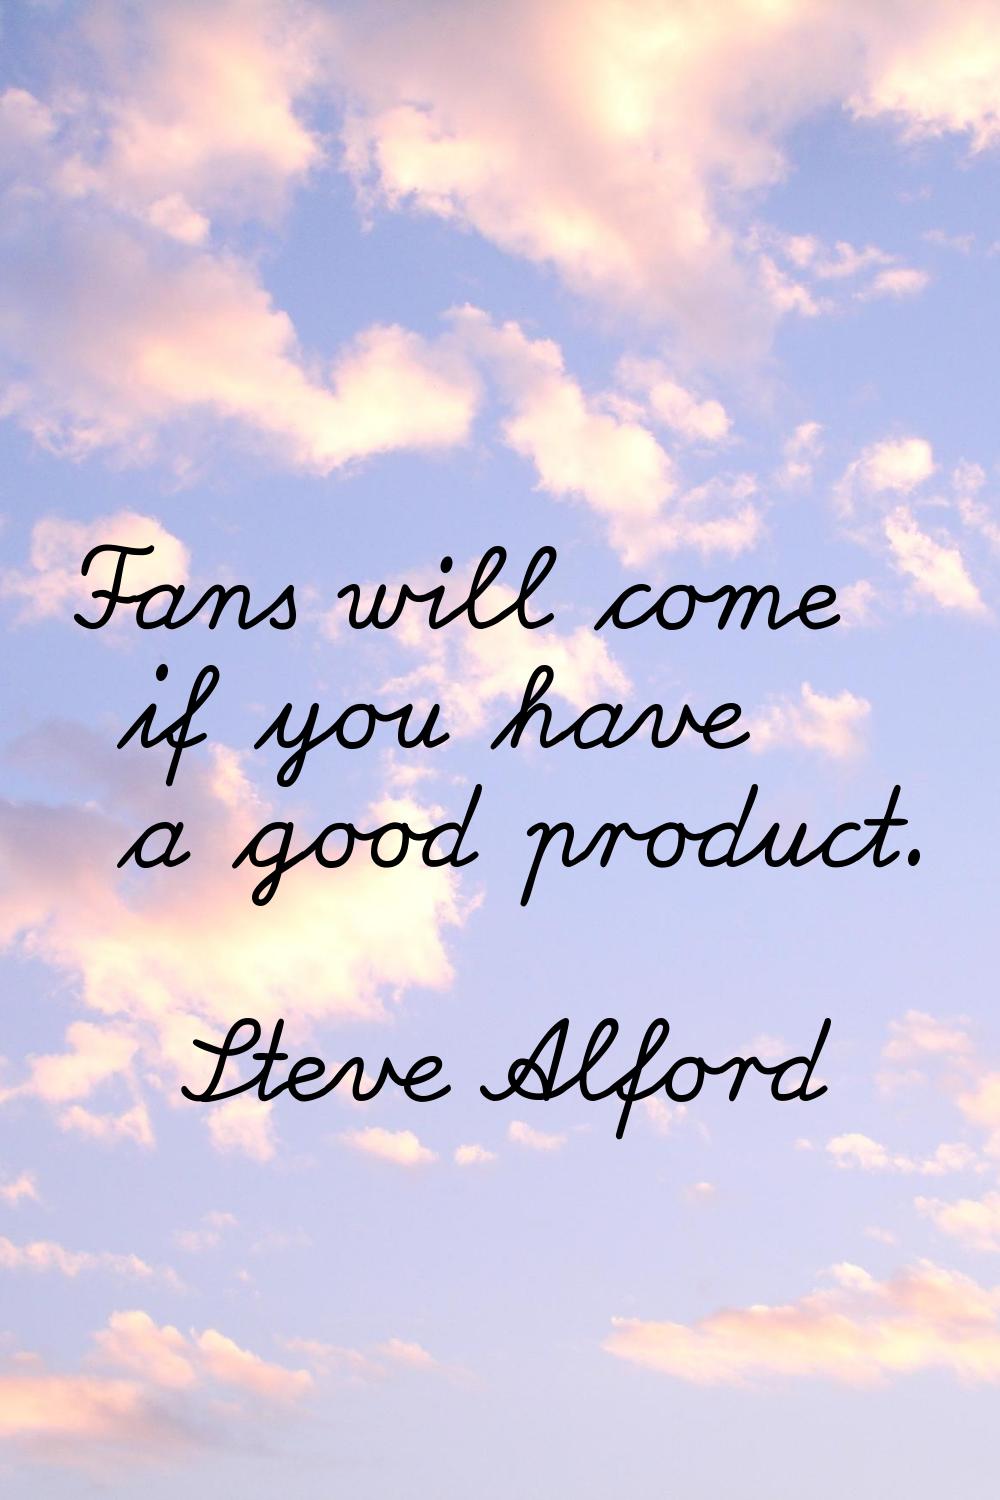 Fans will come if you have a good product.